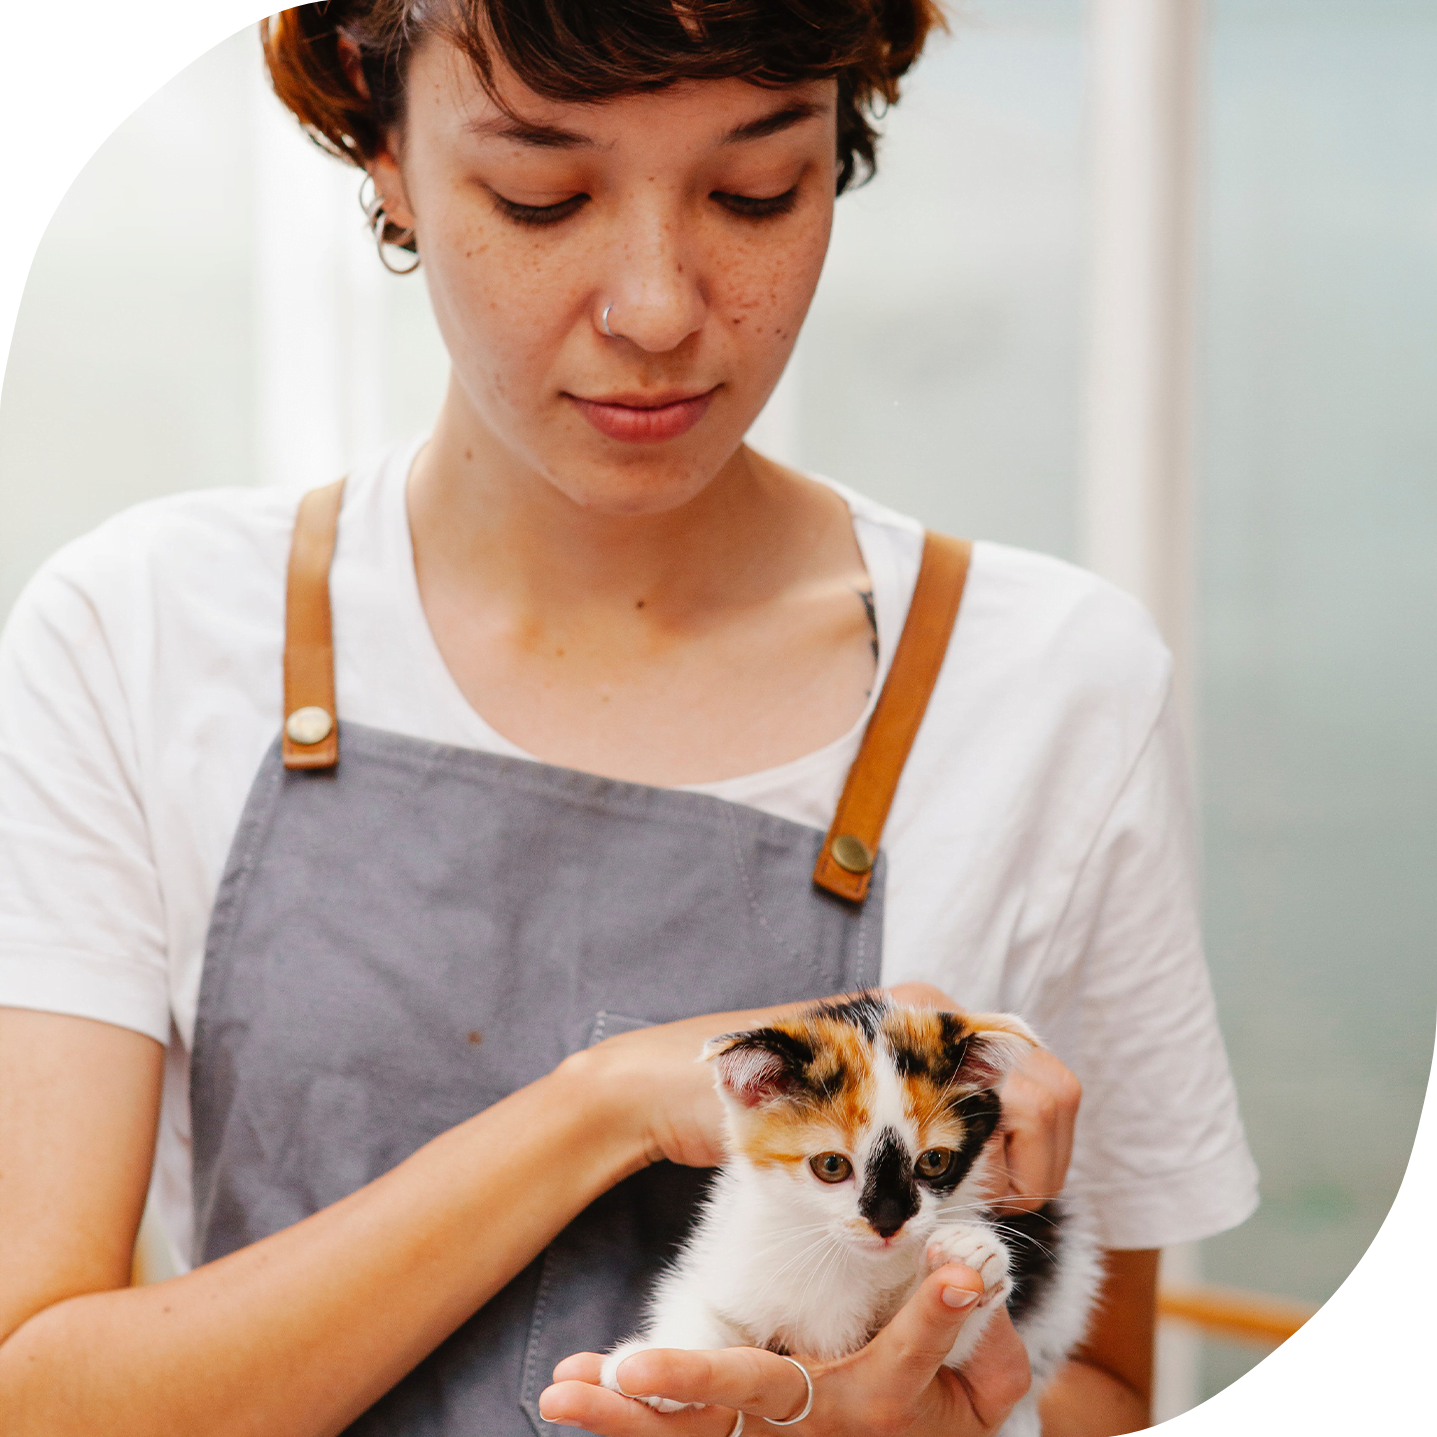 A close-up portrait of a young white person working at a pet store. They are holding a kitten.